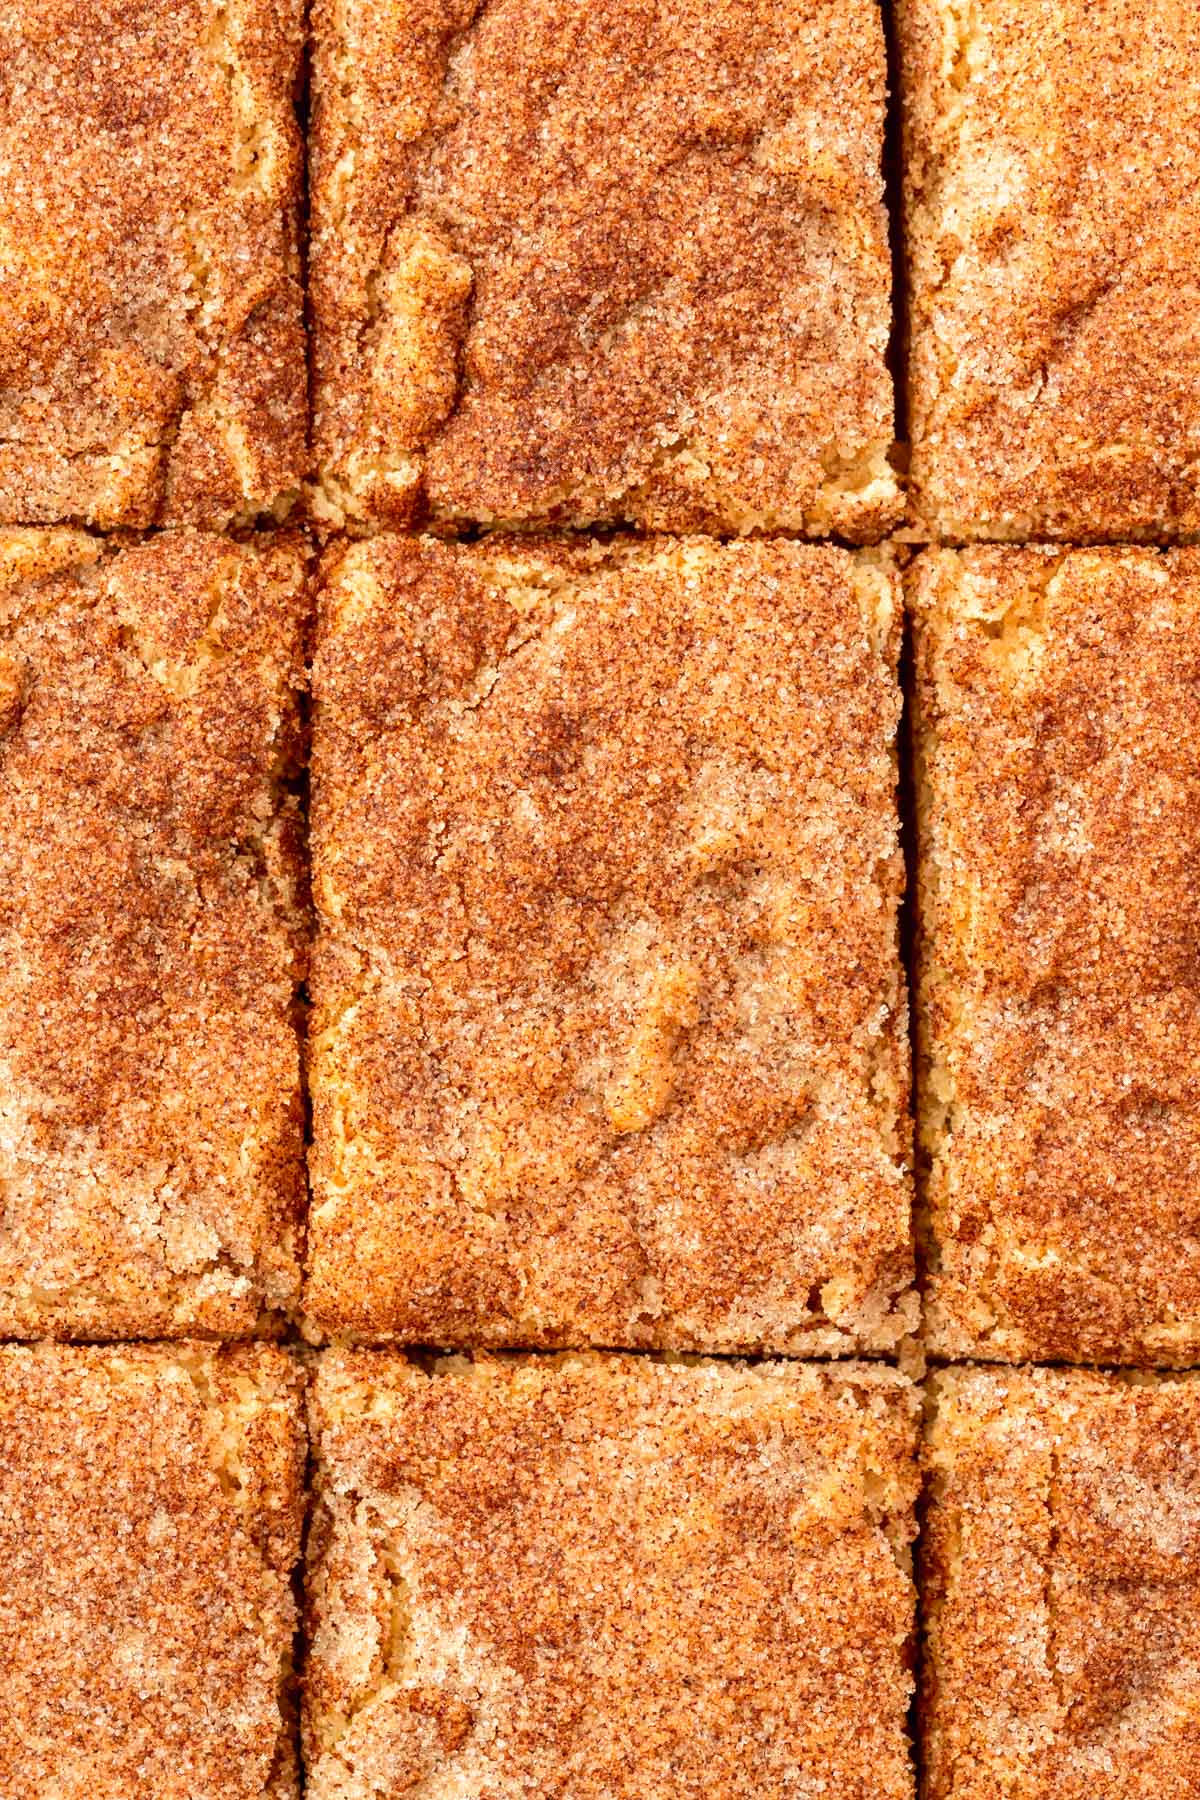 A close up of snickerdoodle bars that have been sliced into 9 equal pieces.